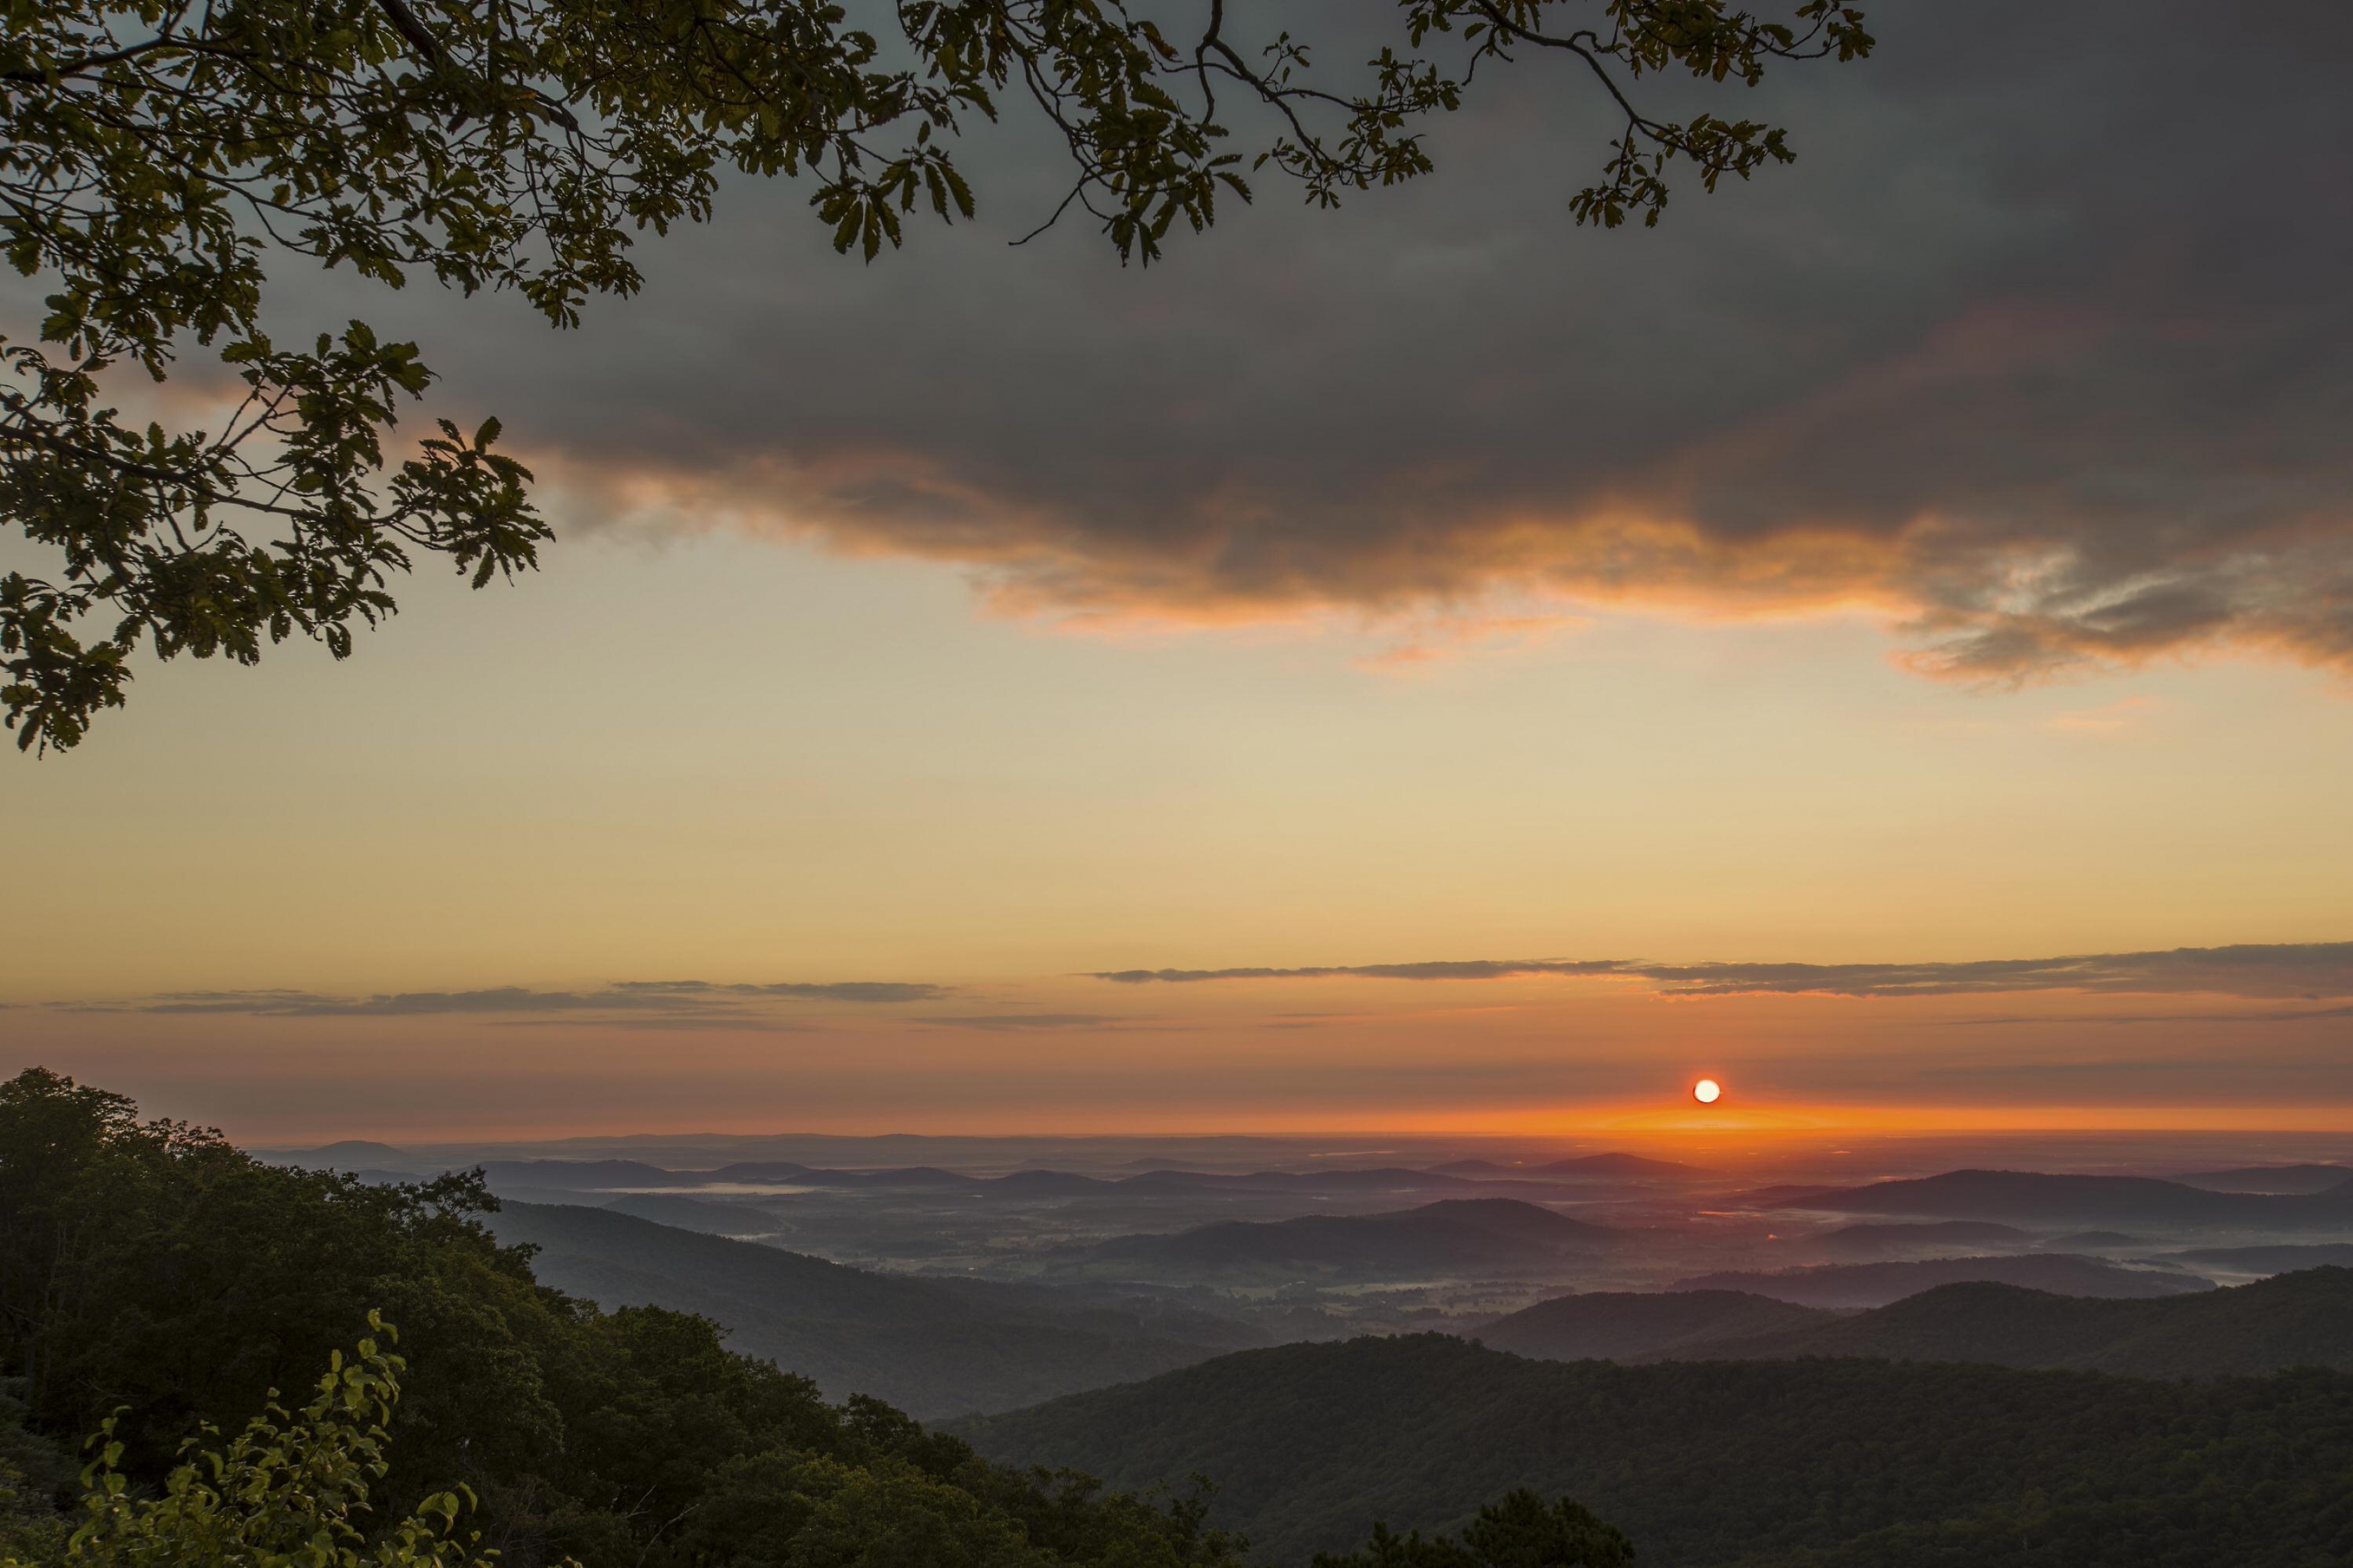 Orange sun rising over the misty valley from Hazel Mountain Overlook at Shenandoah National Park